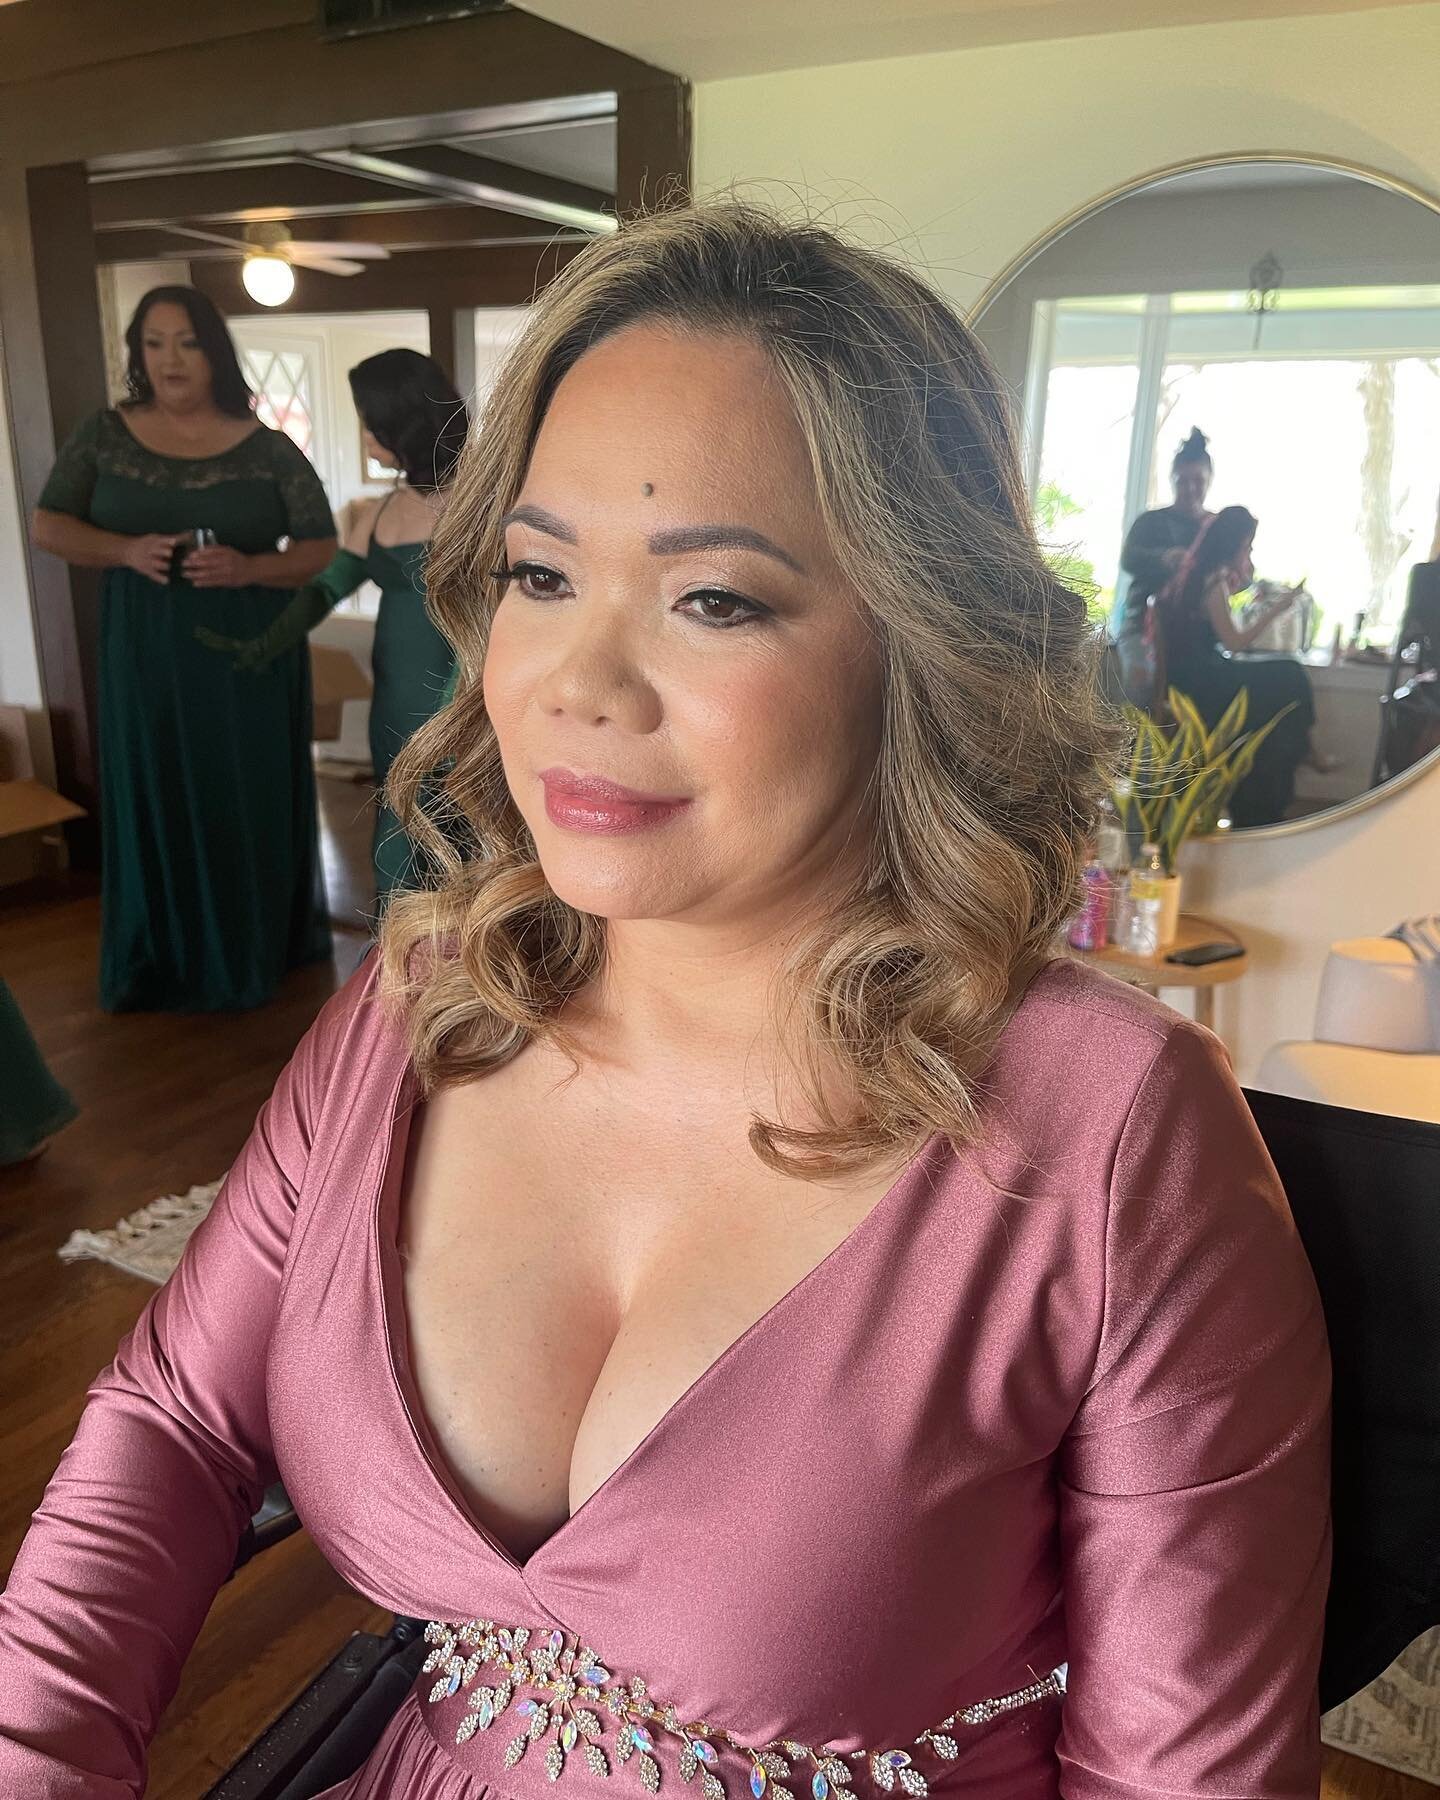 Older sister or mother of the bride? 😍 momma wanted some soft glam so that&rsquo;s what she got! 💕
.
Contact us for your custom quote for beauty services on your big day! 💕